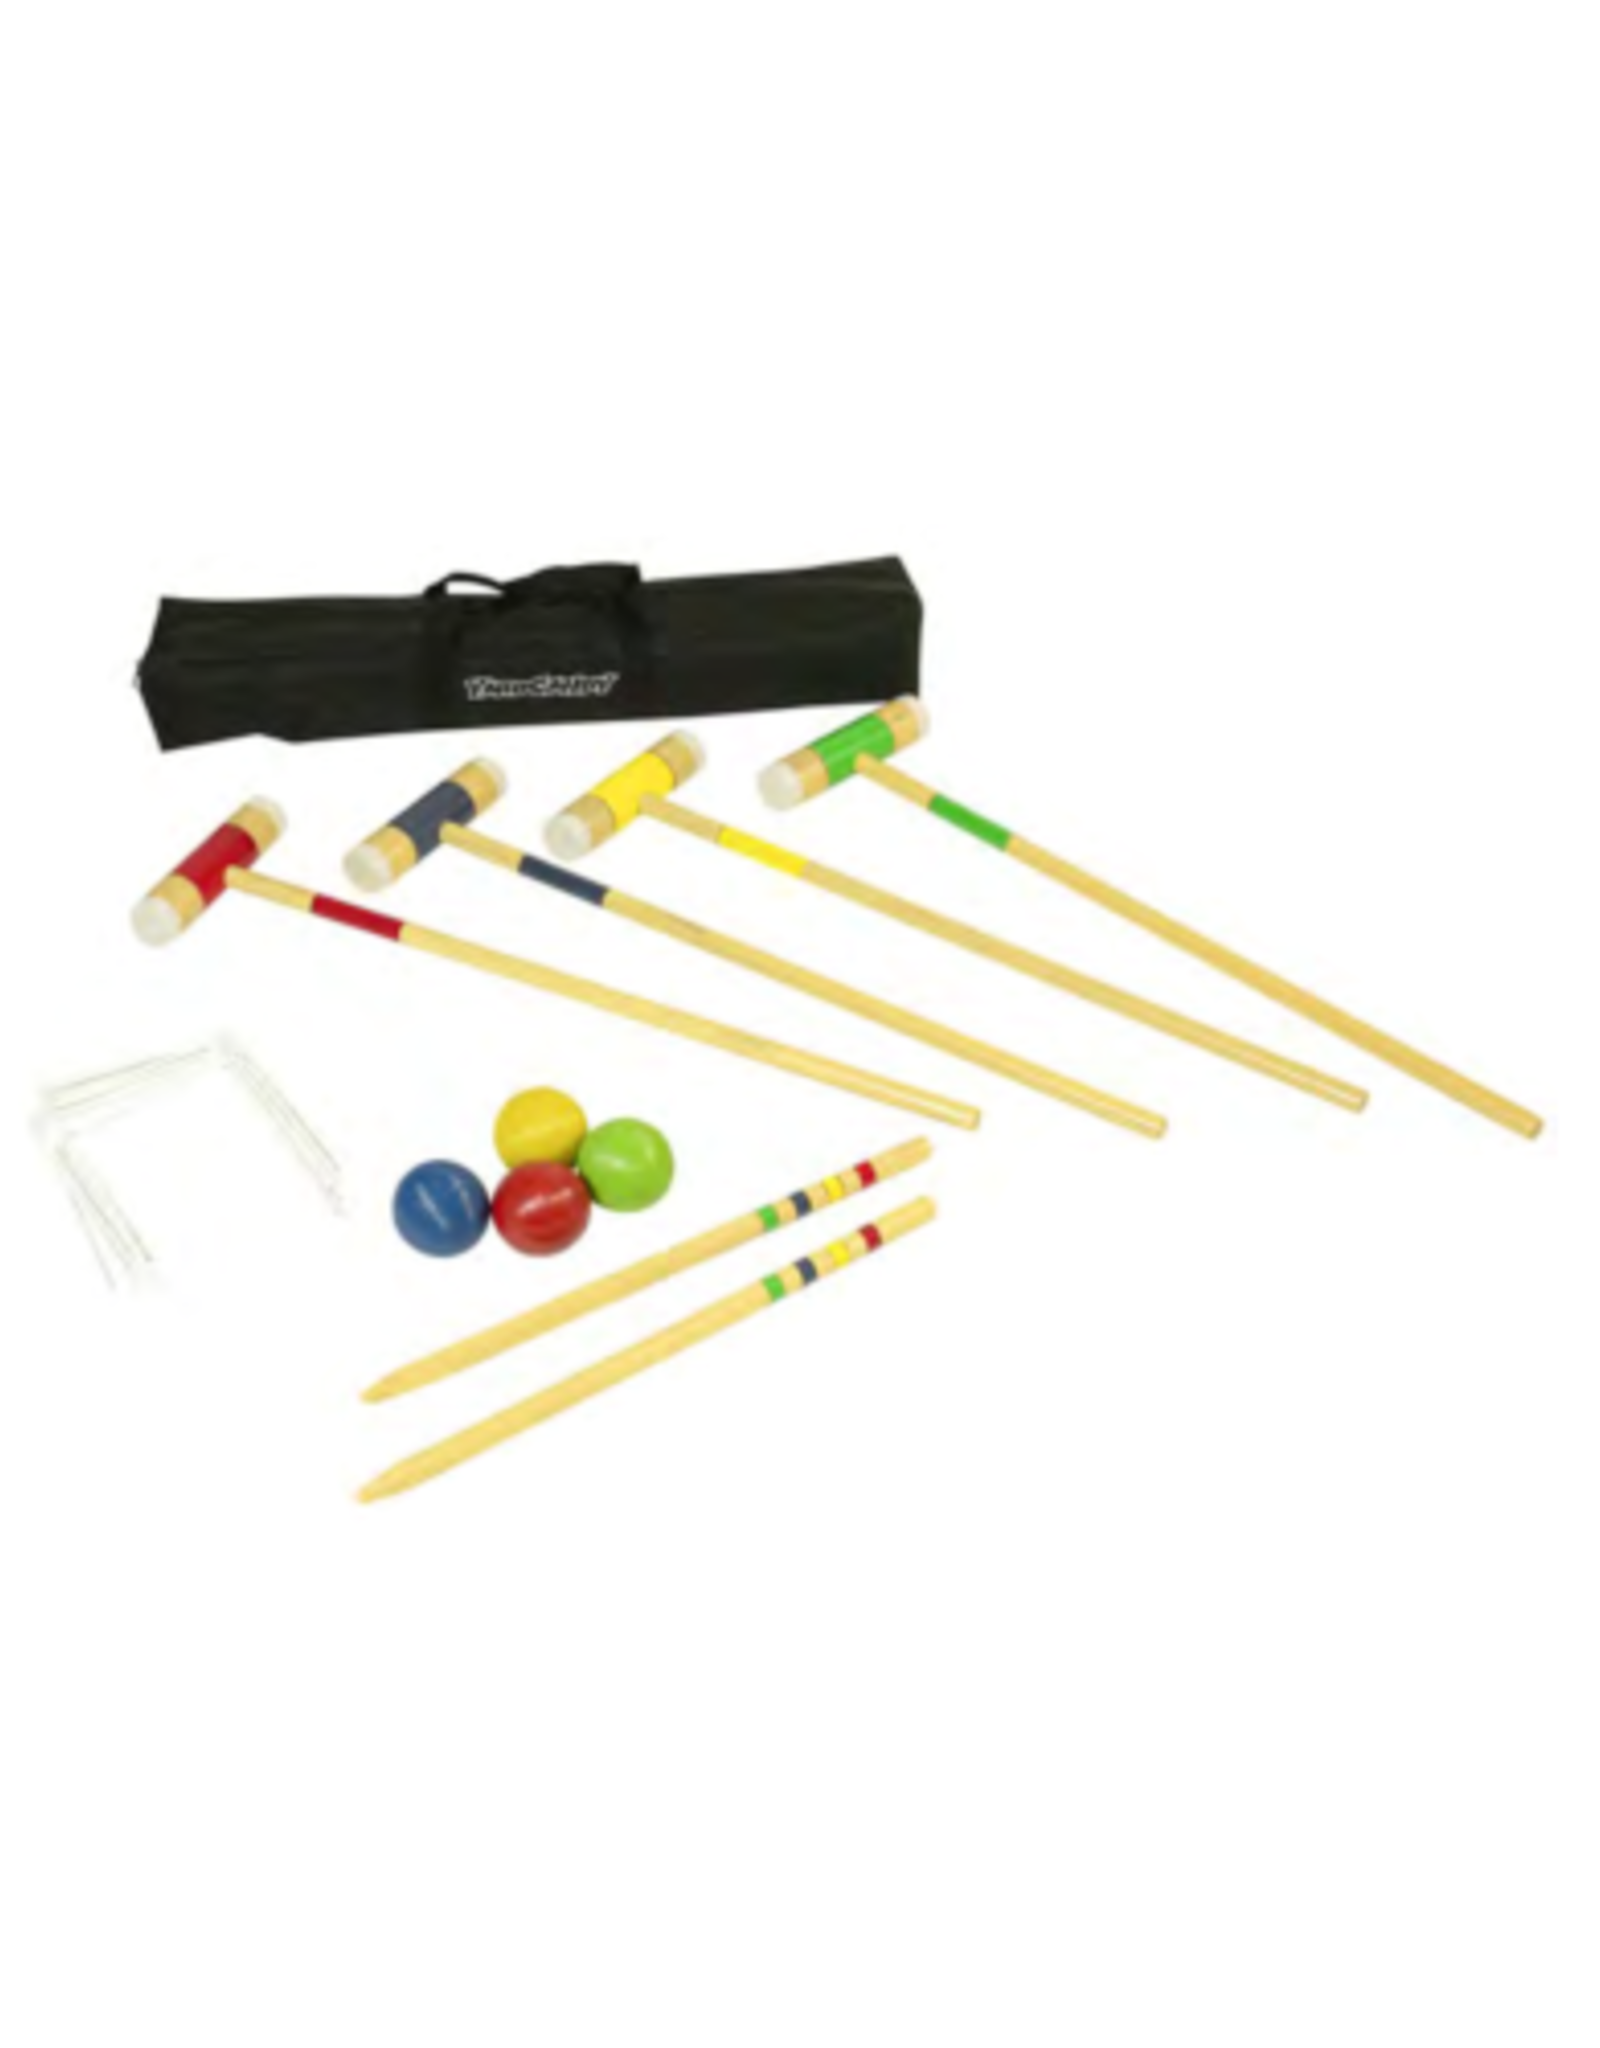 Yard Candy - Deluxe Wooden Croquet Set (4 Players)